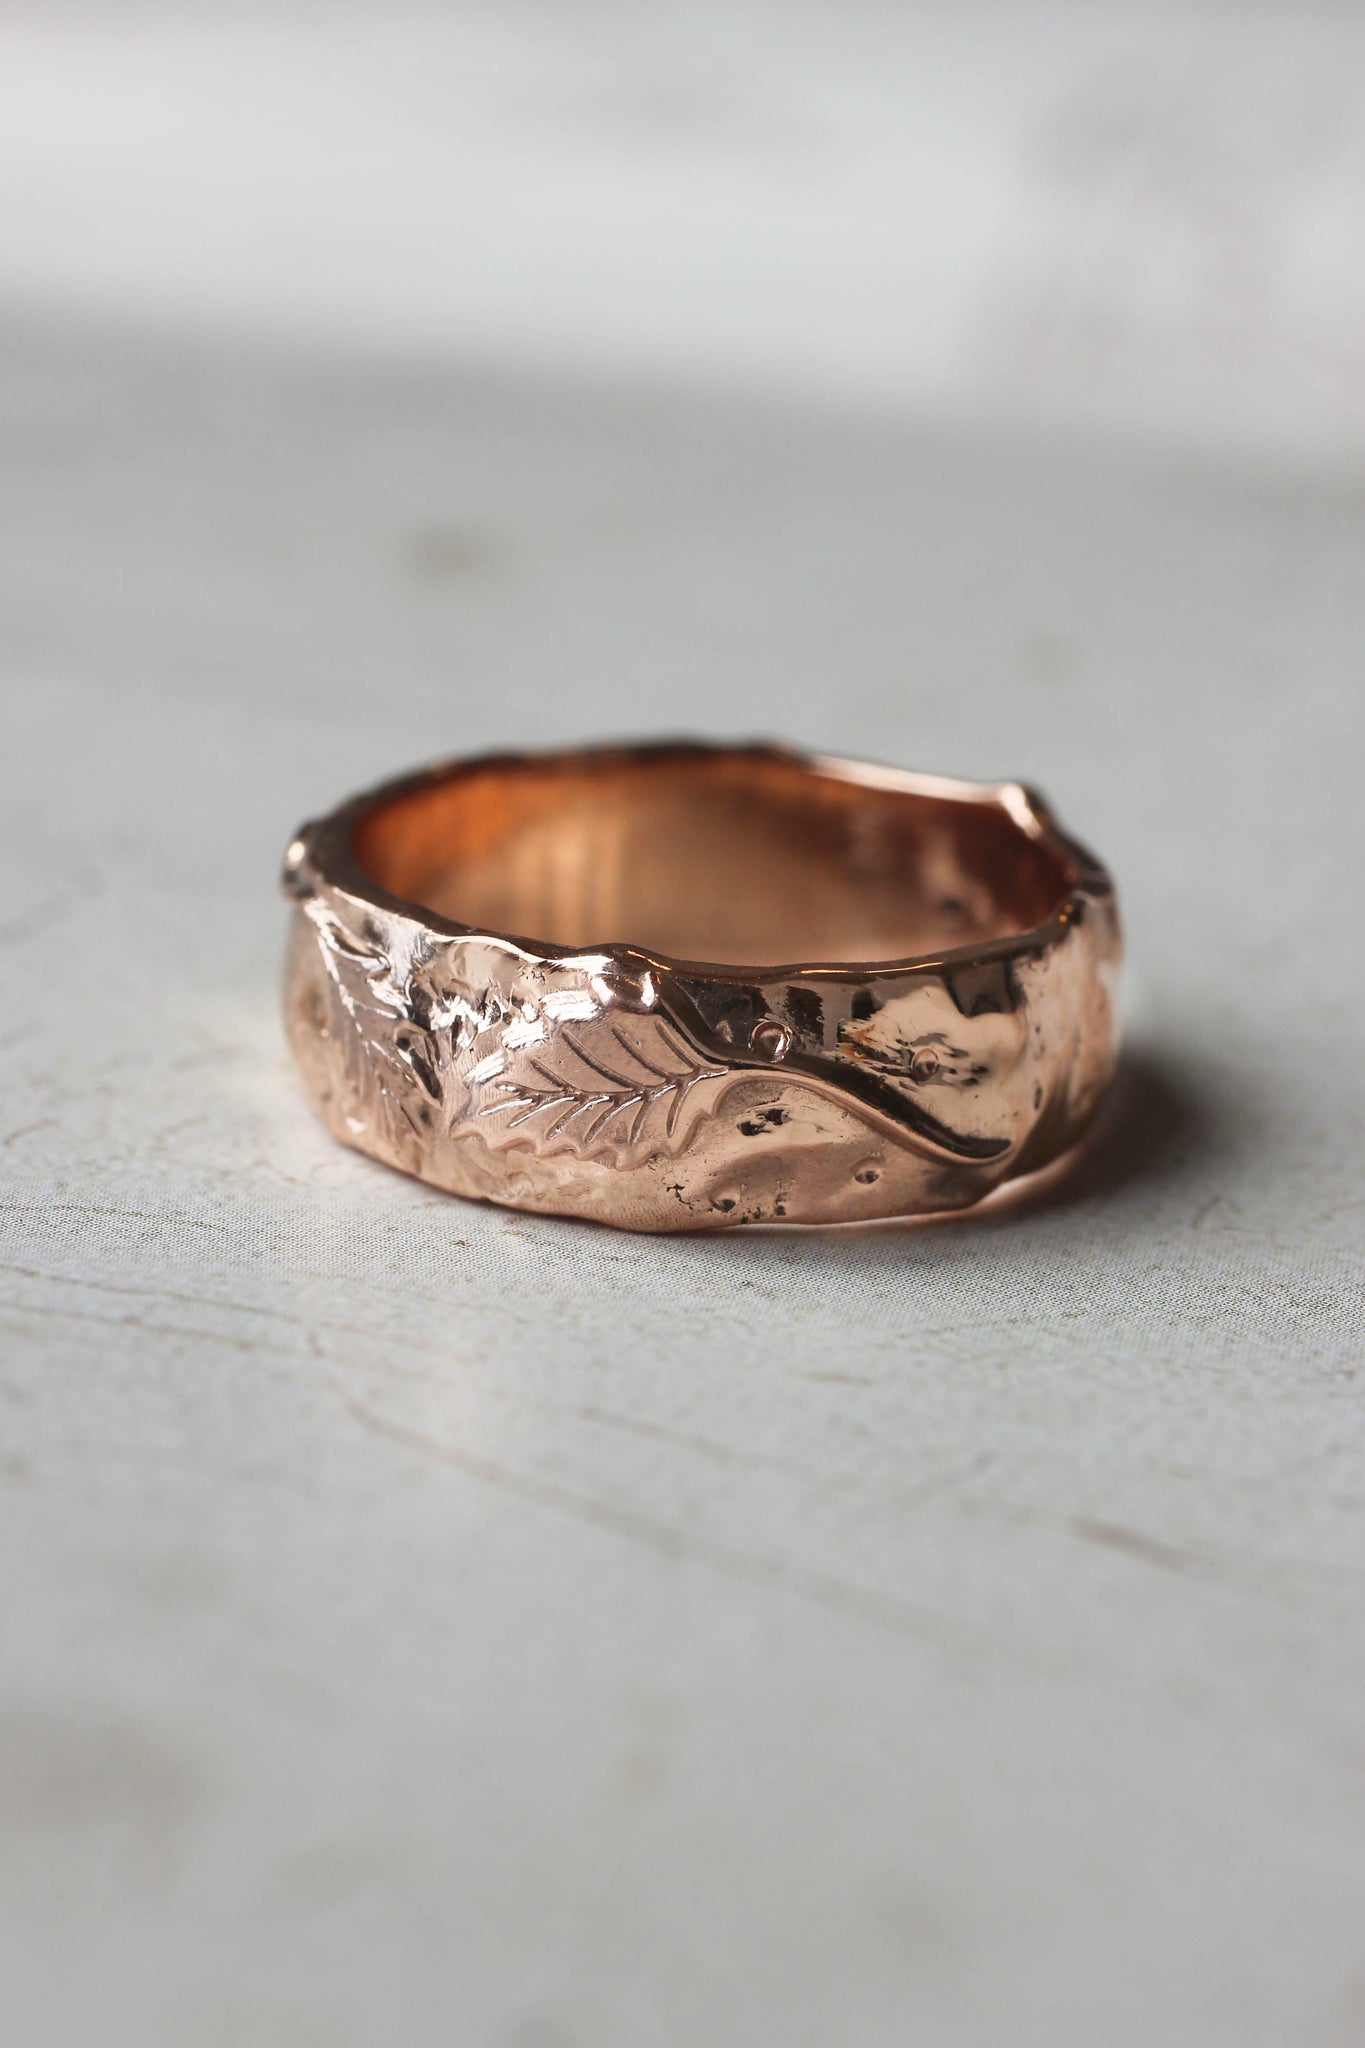 Nature wedding bands set: wide ring for him, rose flower ring for her - Eden Garden Jewelry™